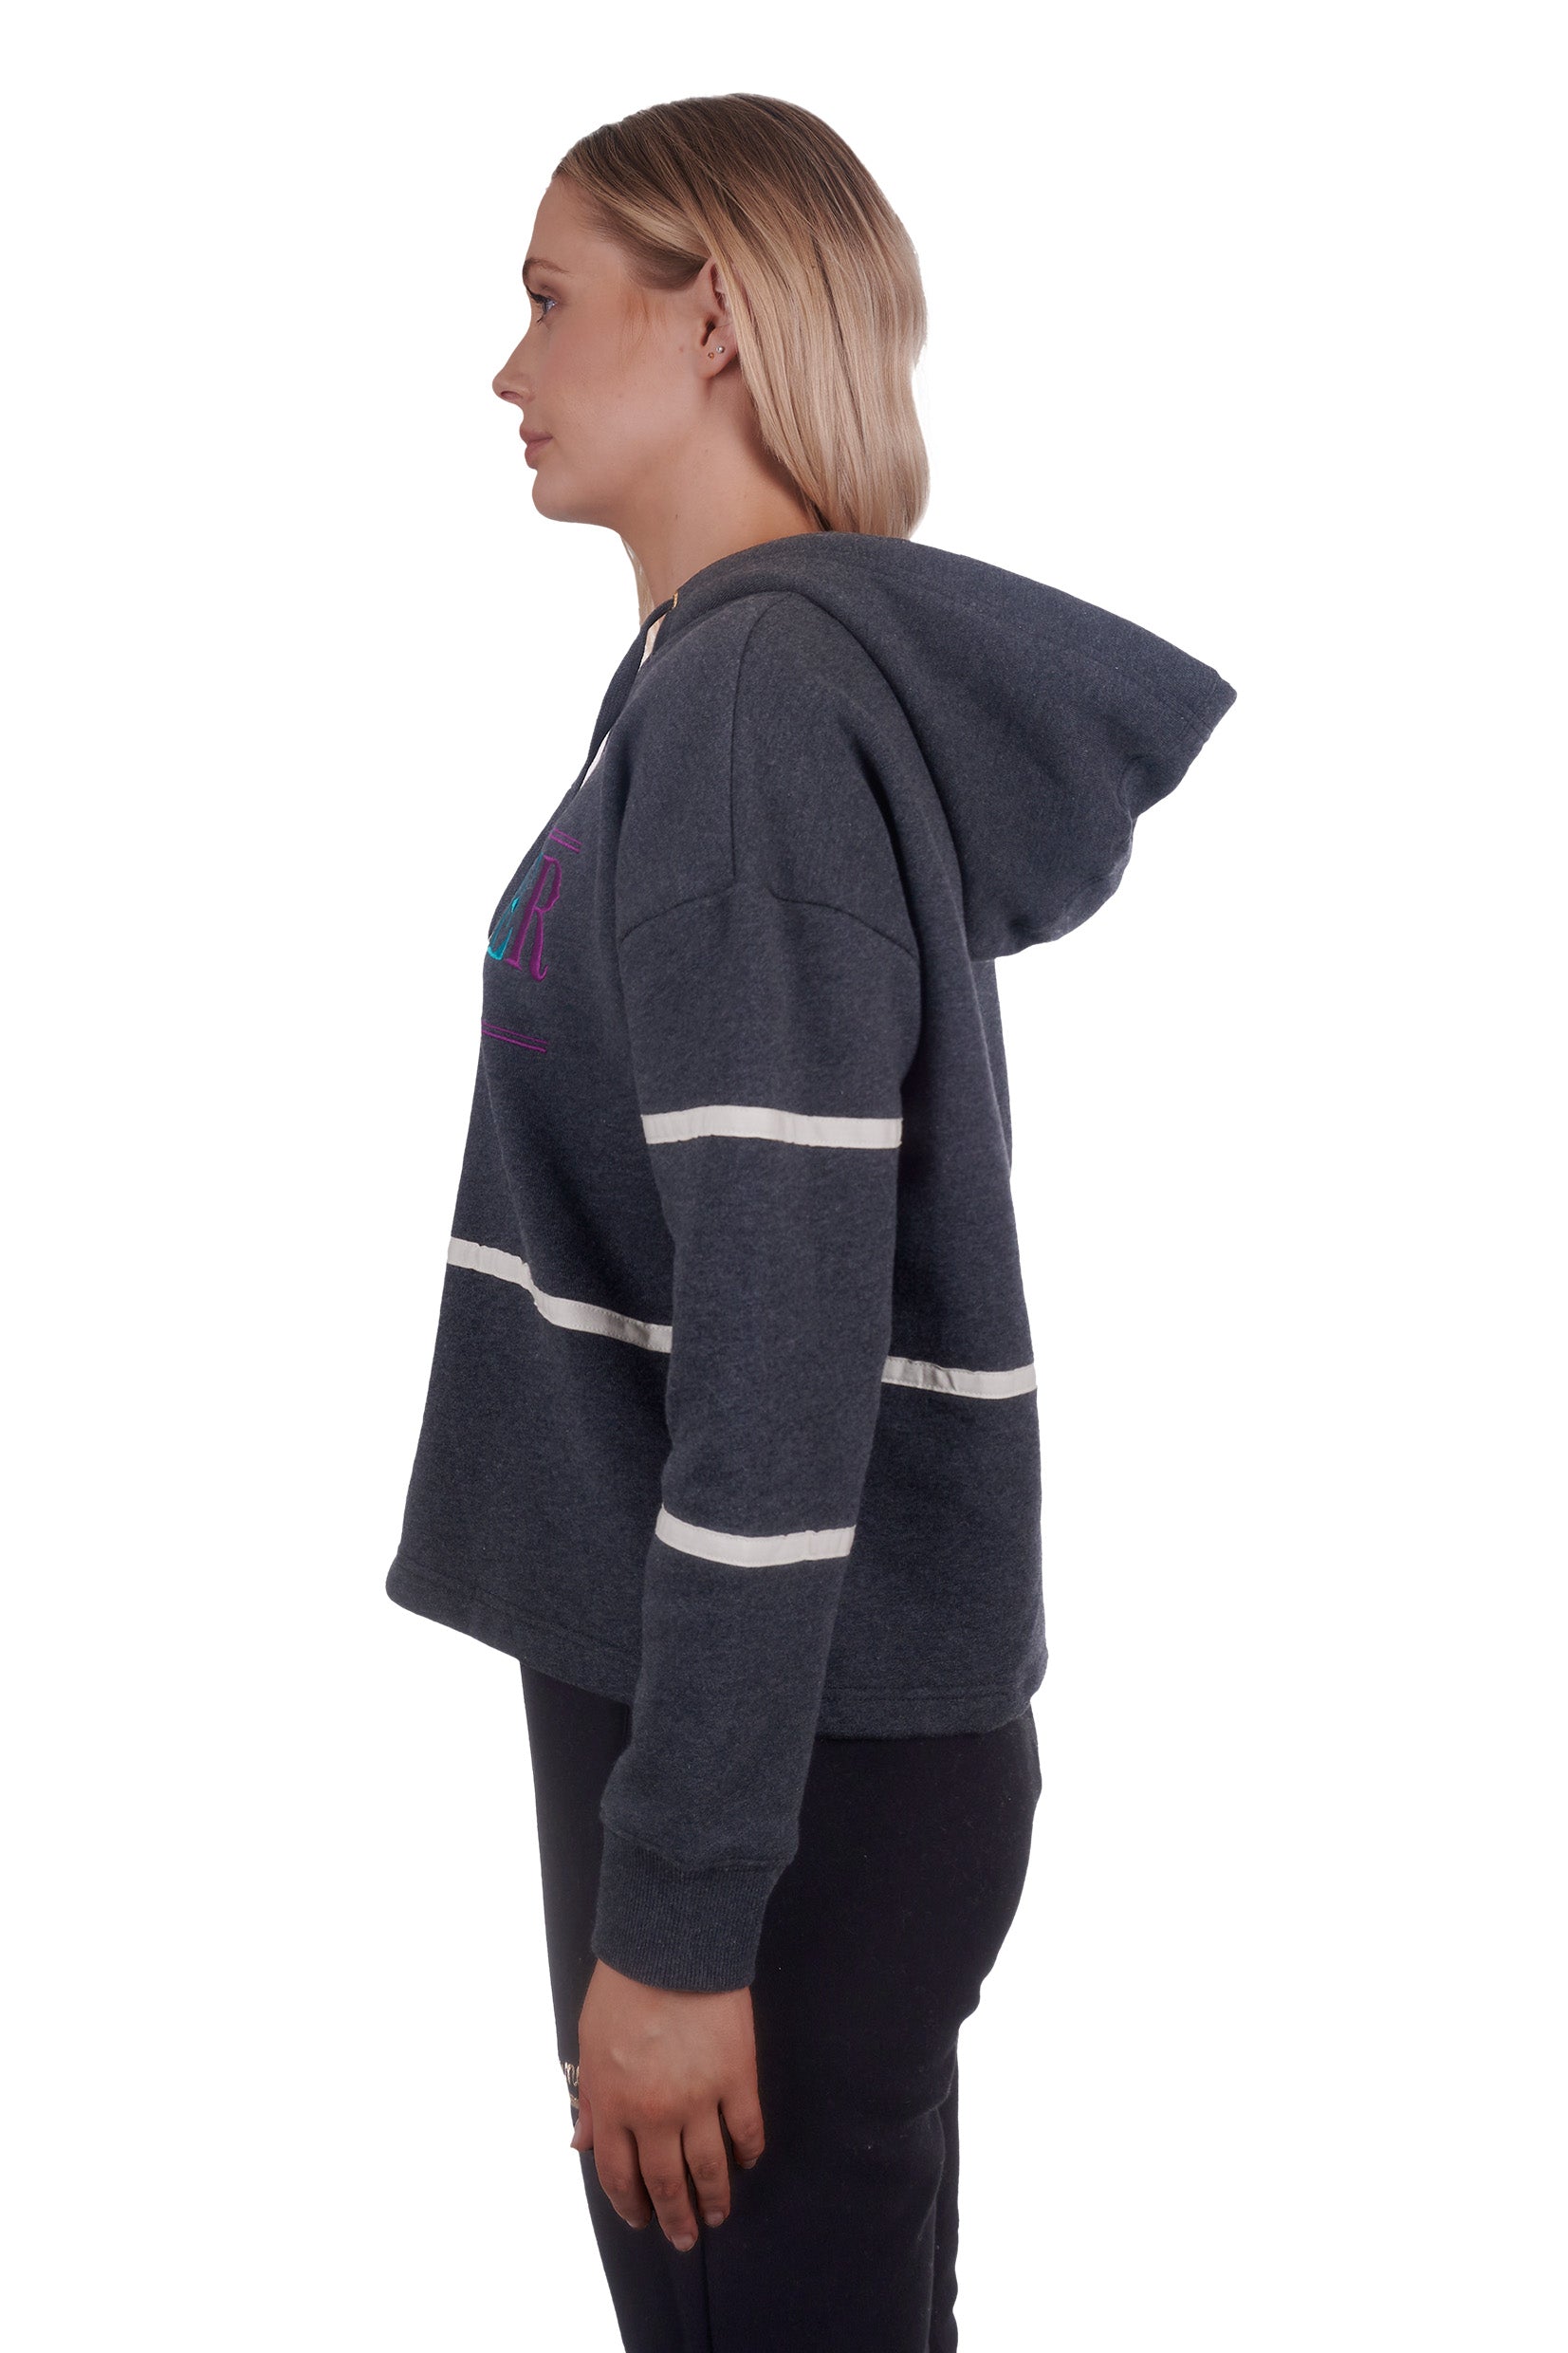 Wrangler Wmns Cathie Pullover Hoodie